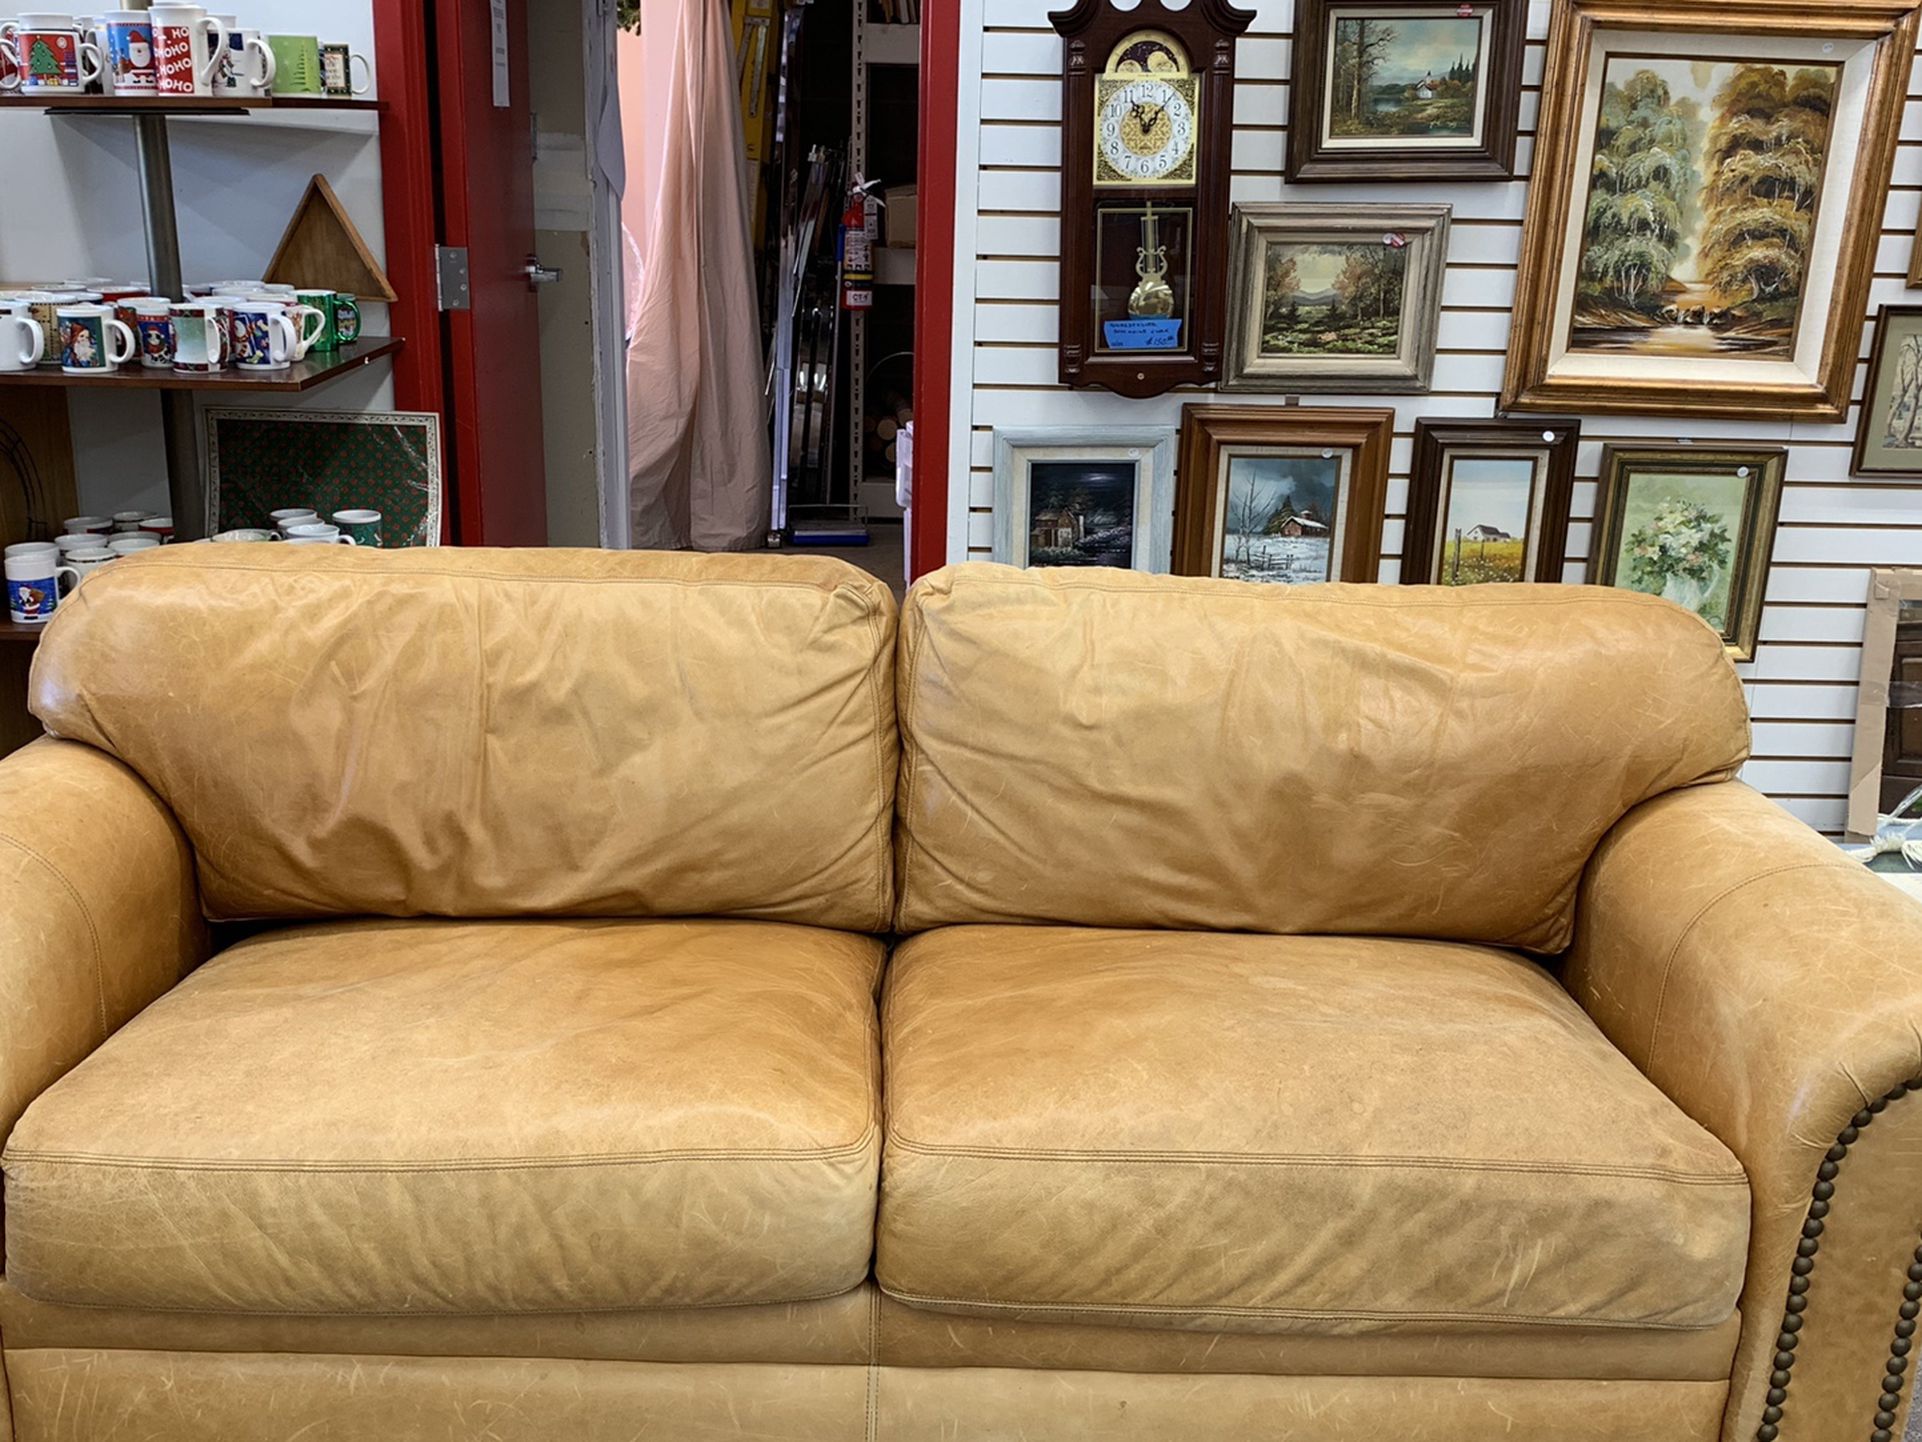 Leather Sofa In Warm Honey In Great Condition!